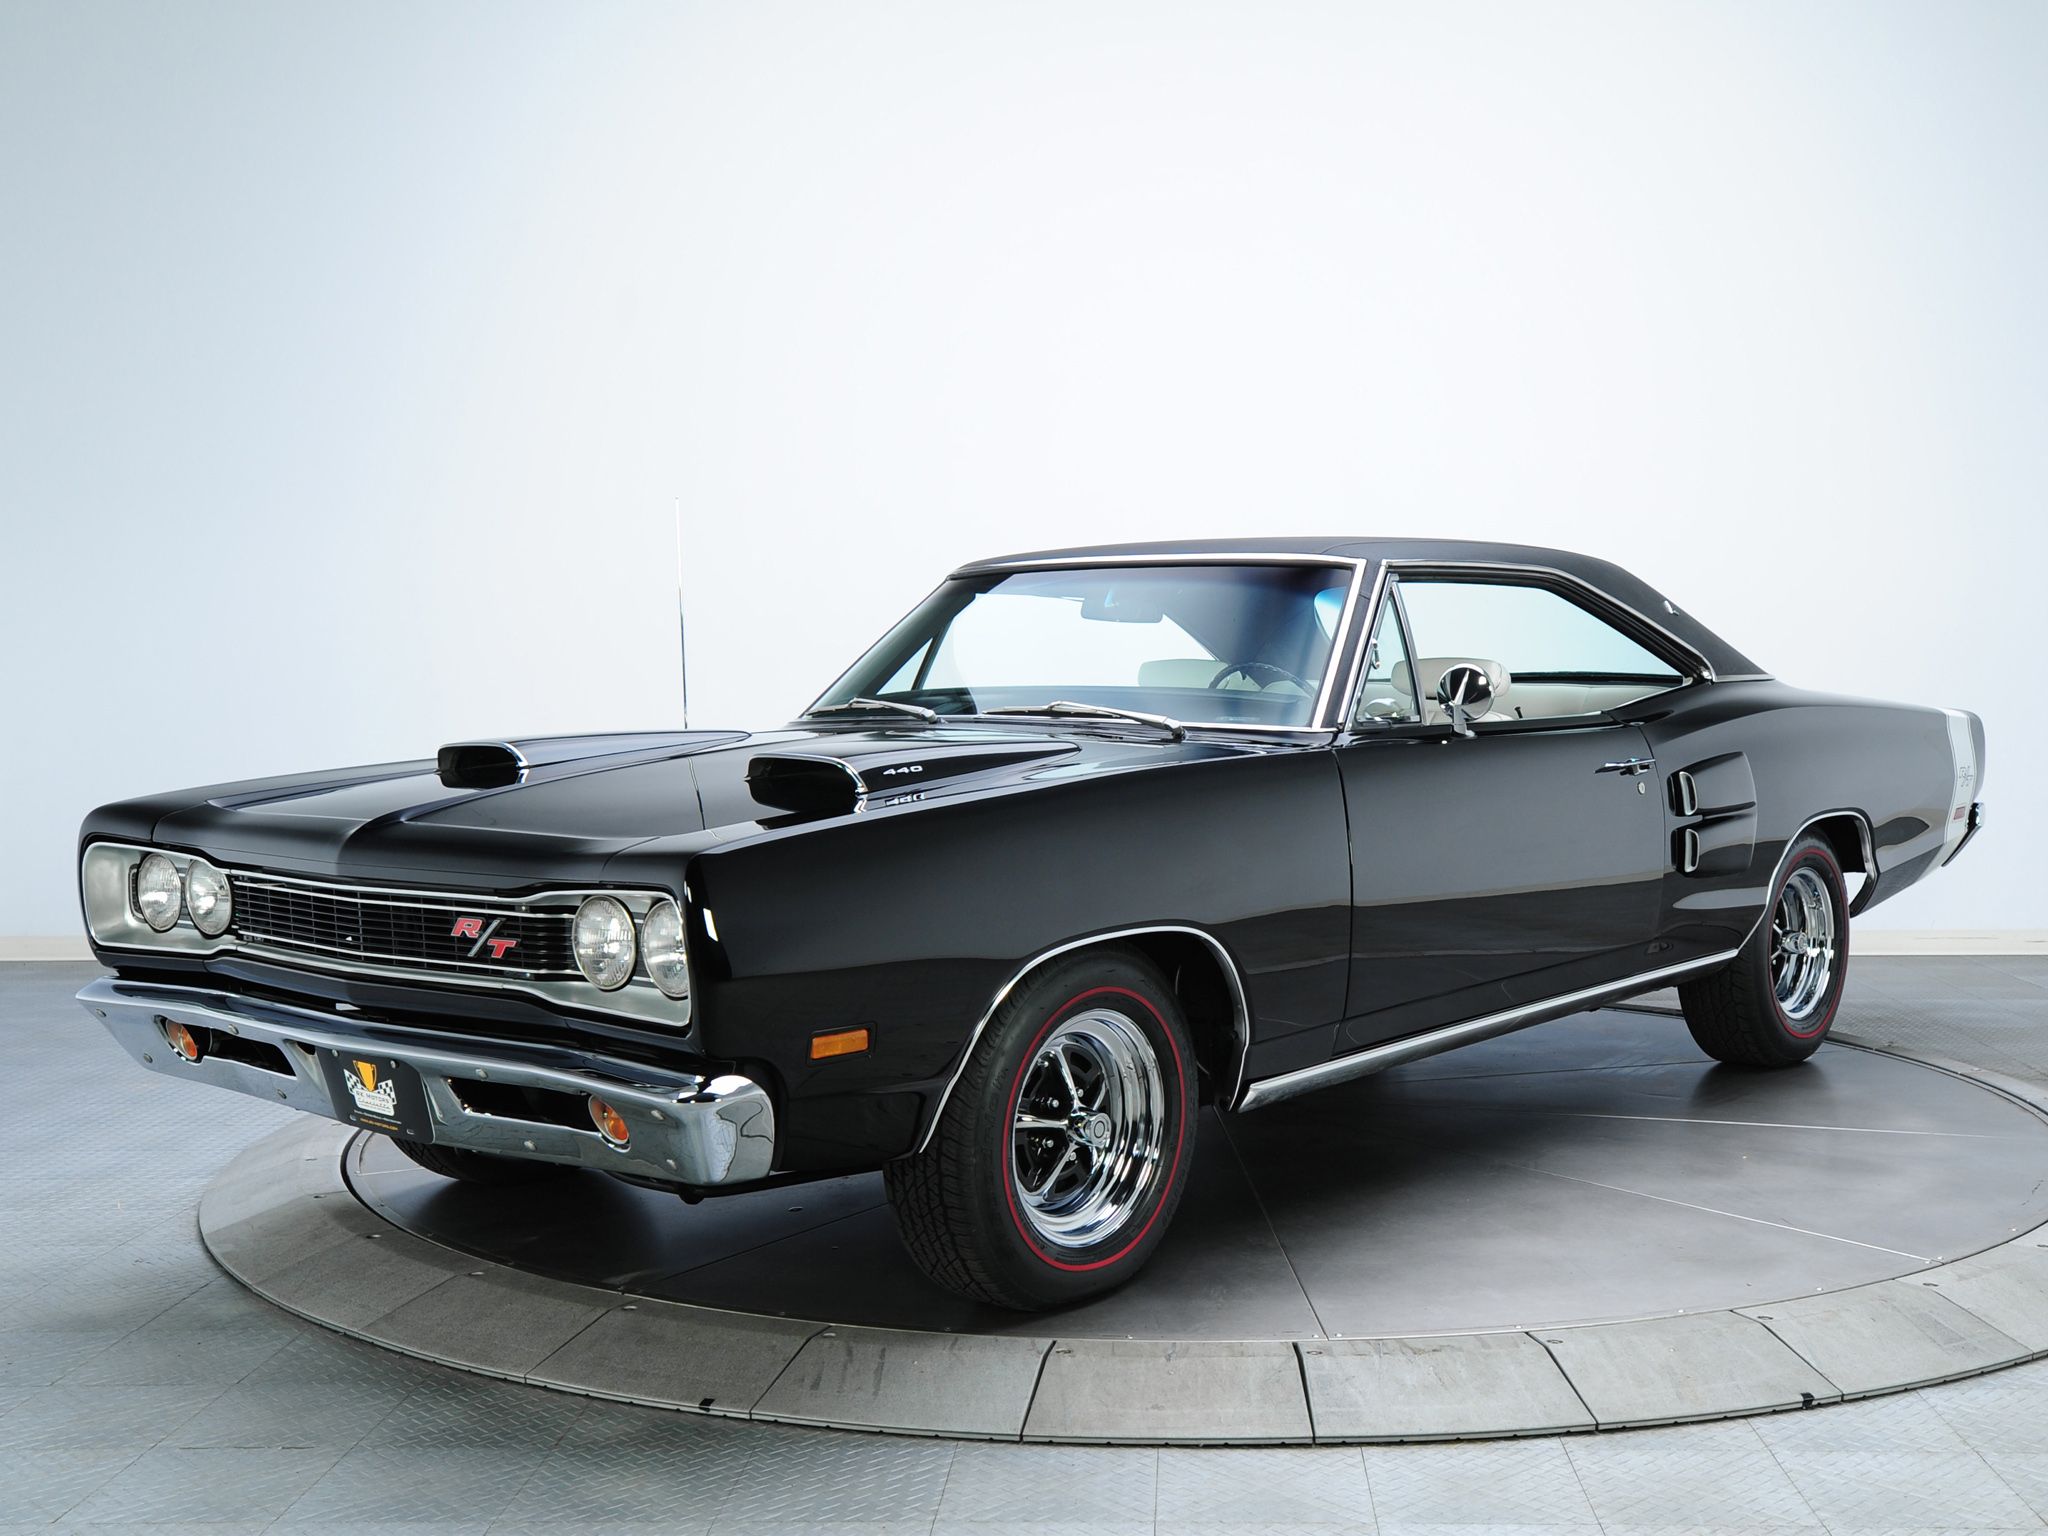 Muscle Car Definition On Dodge American Cars